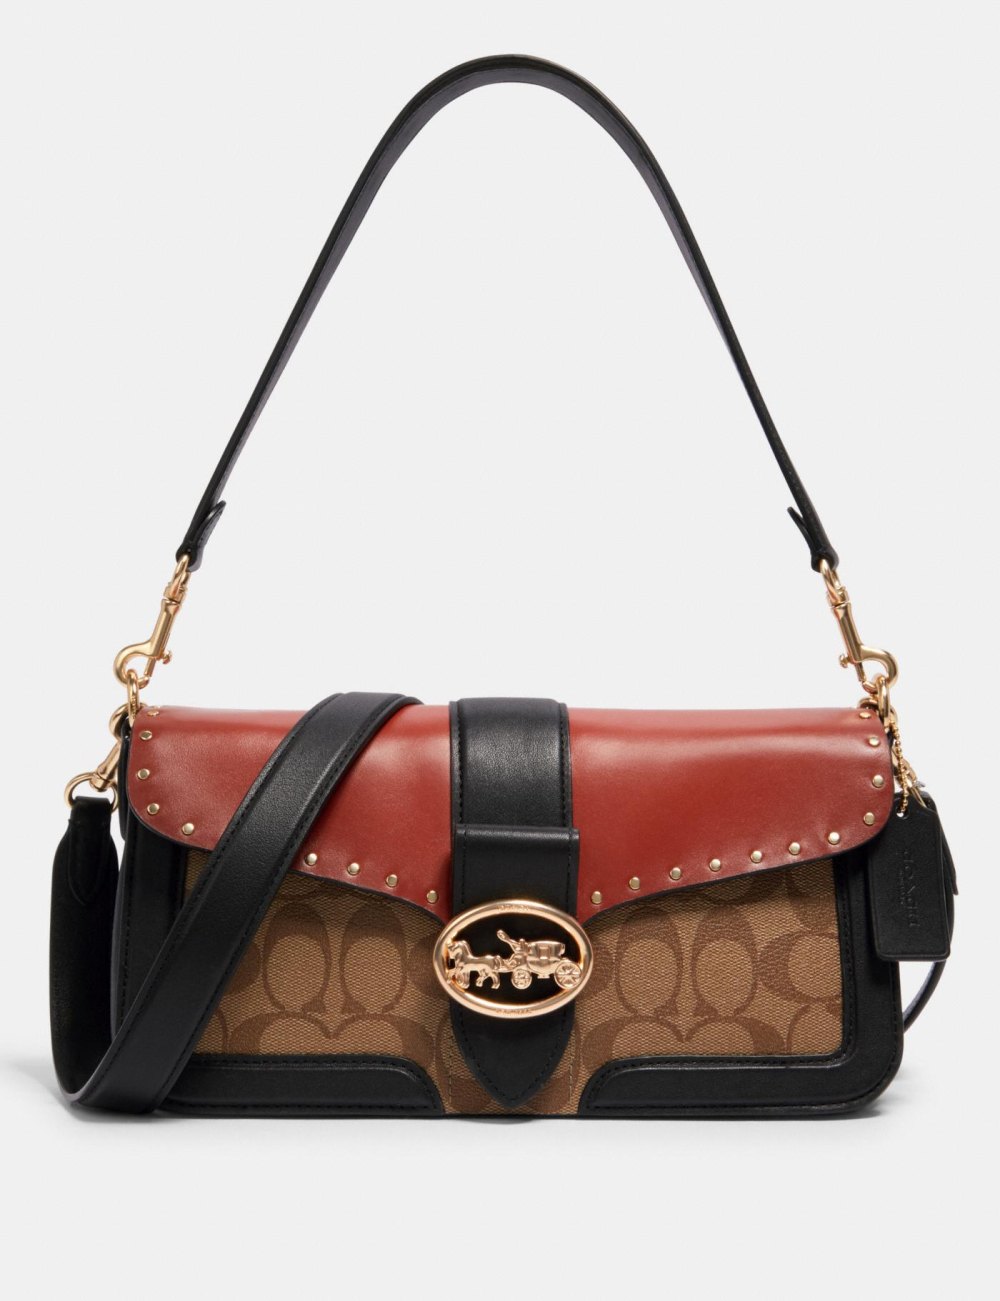 Coach purse: You can get a Coach purse for 70% off right now